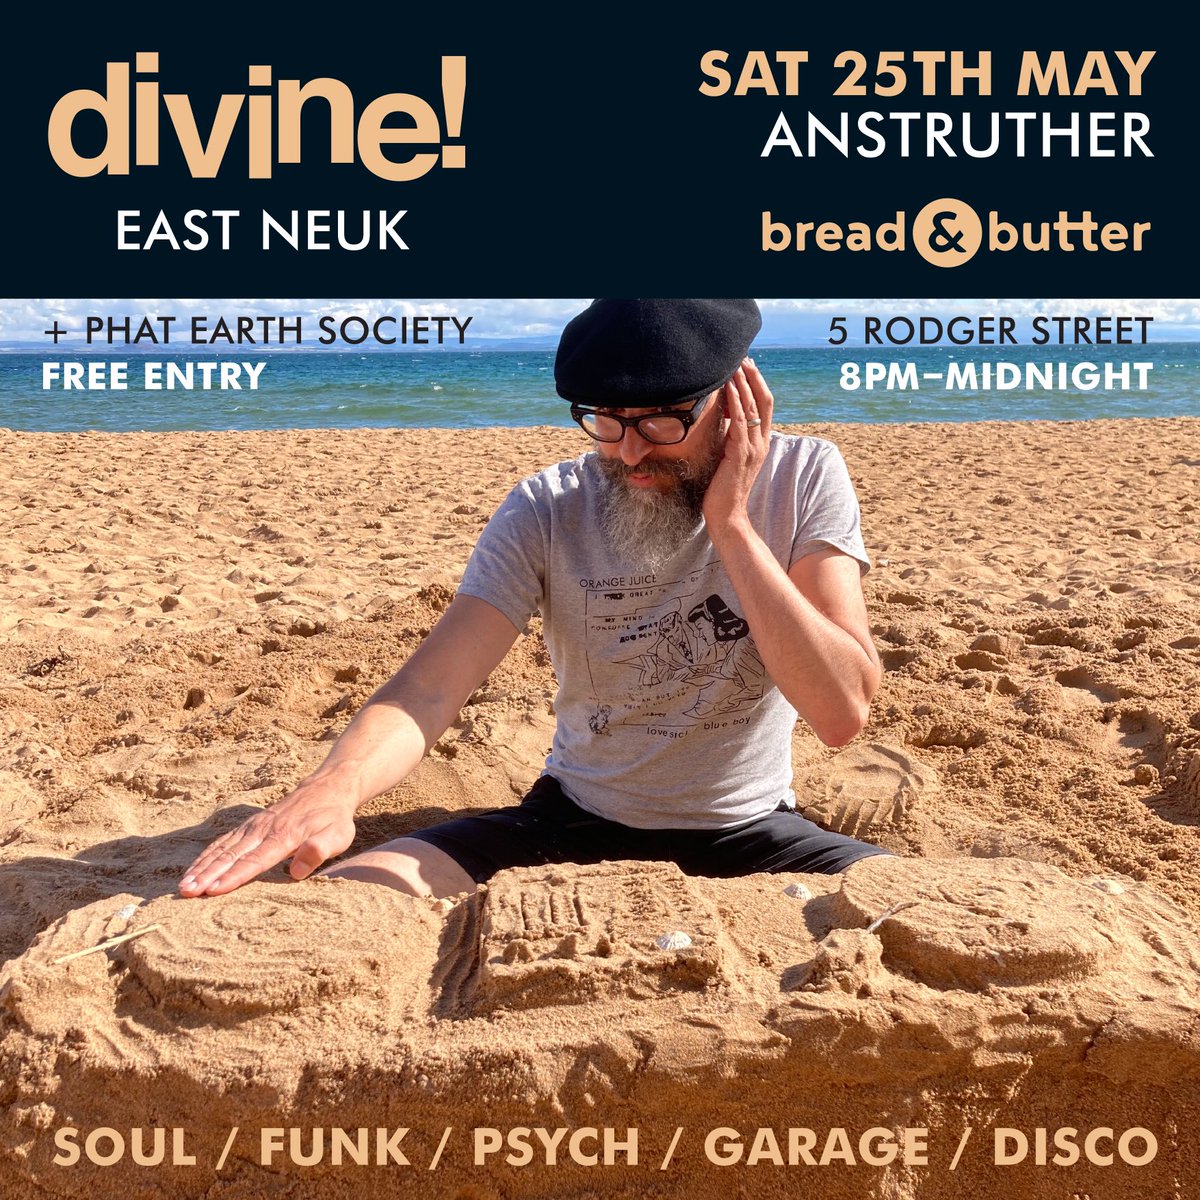 Spinning some tunes over in the East Neuk this weekend! Saturday night in the intimate Bread & Butter Cafe in Anstruther - 8pm till midnight, warm-up by Phat Earth Society and FREE ENTRY! 

#northernsoul #garagepunk #deepfunk @WhatsOnFife